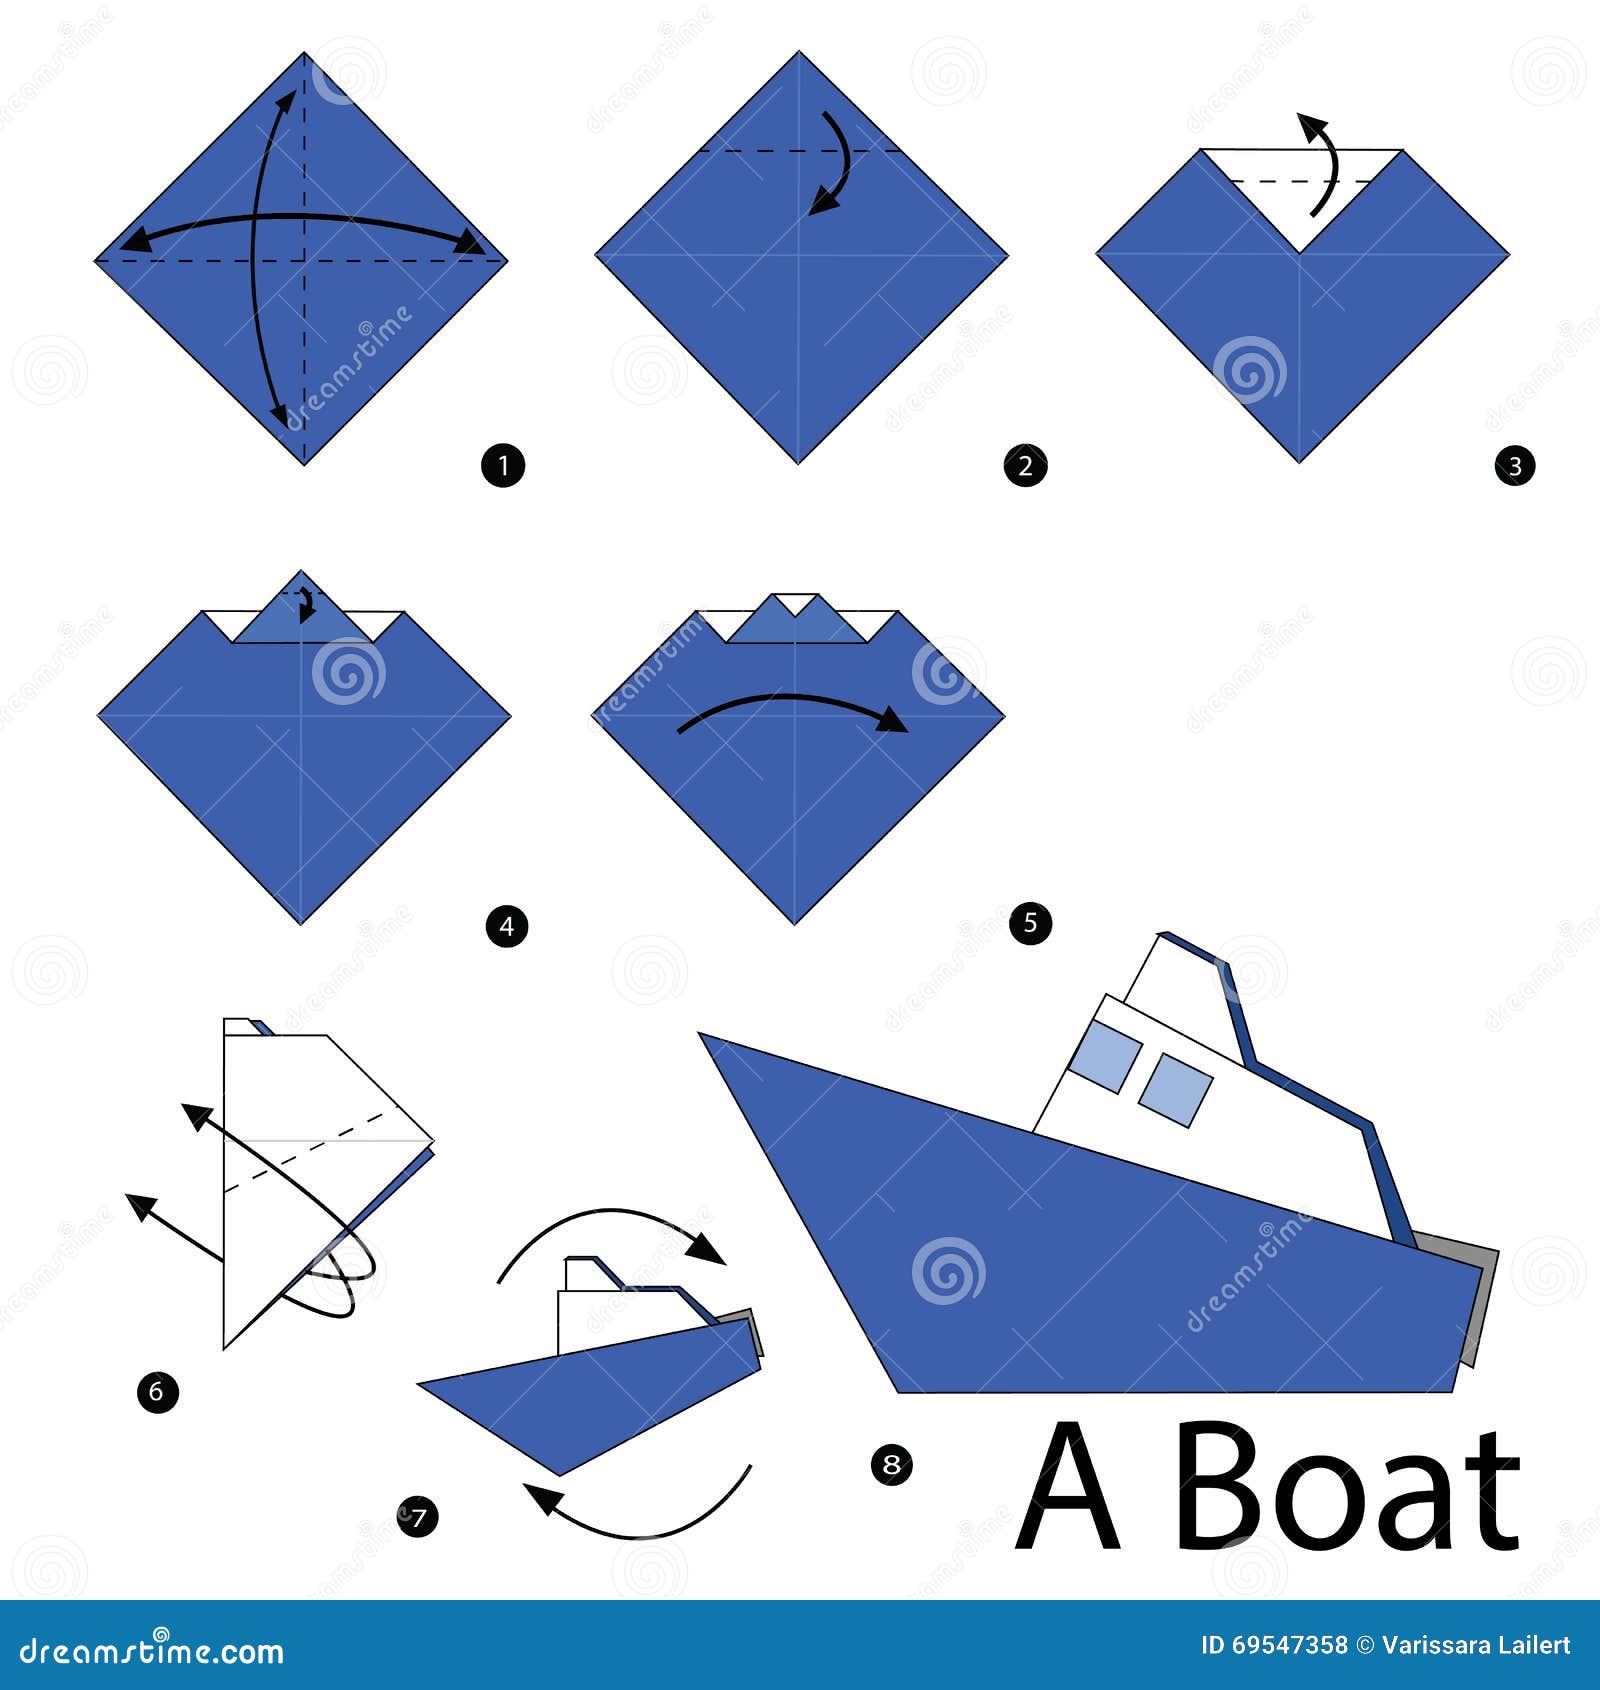 Step By Step Instructions How To Make Origami A Boat. Stock Vector Illustration of hobby